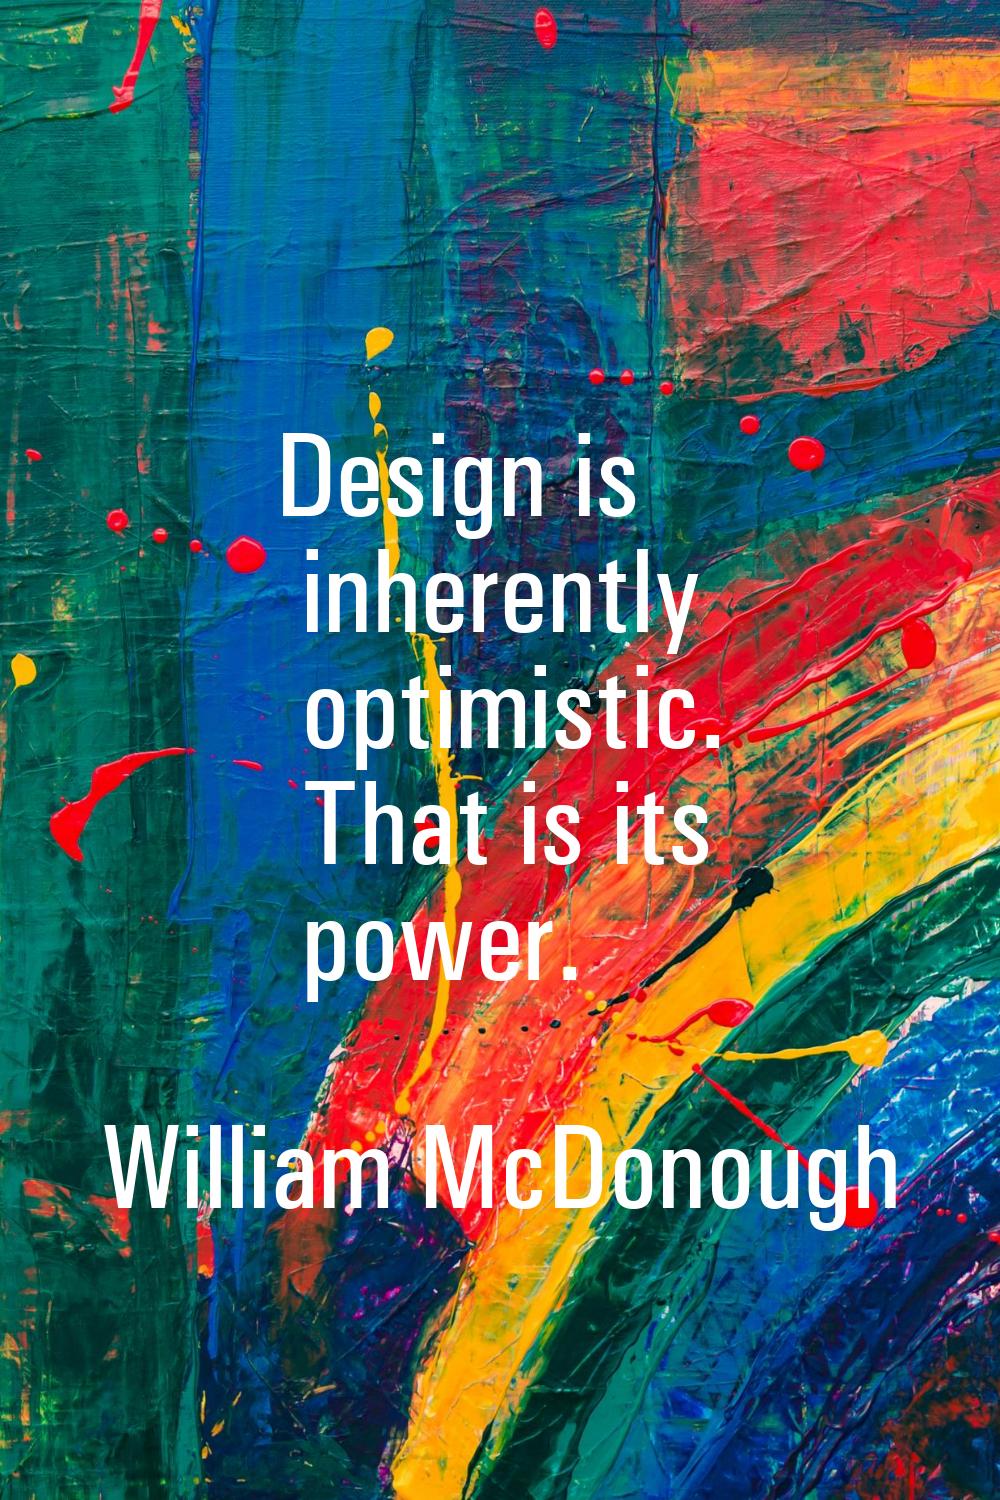 Design is inherently optimistic. That is its power.